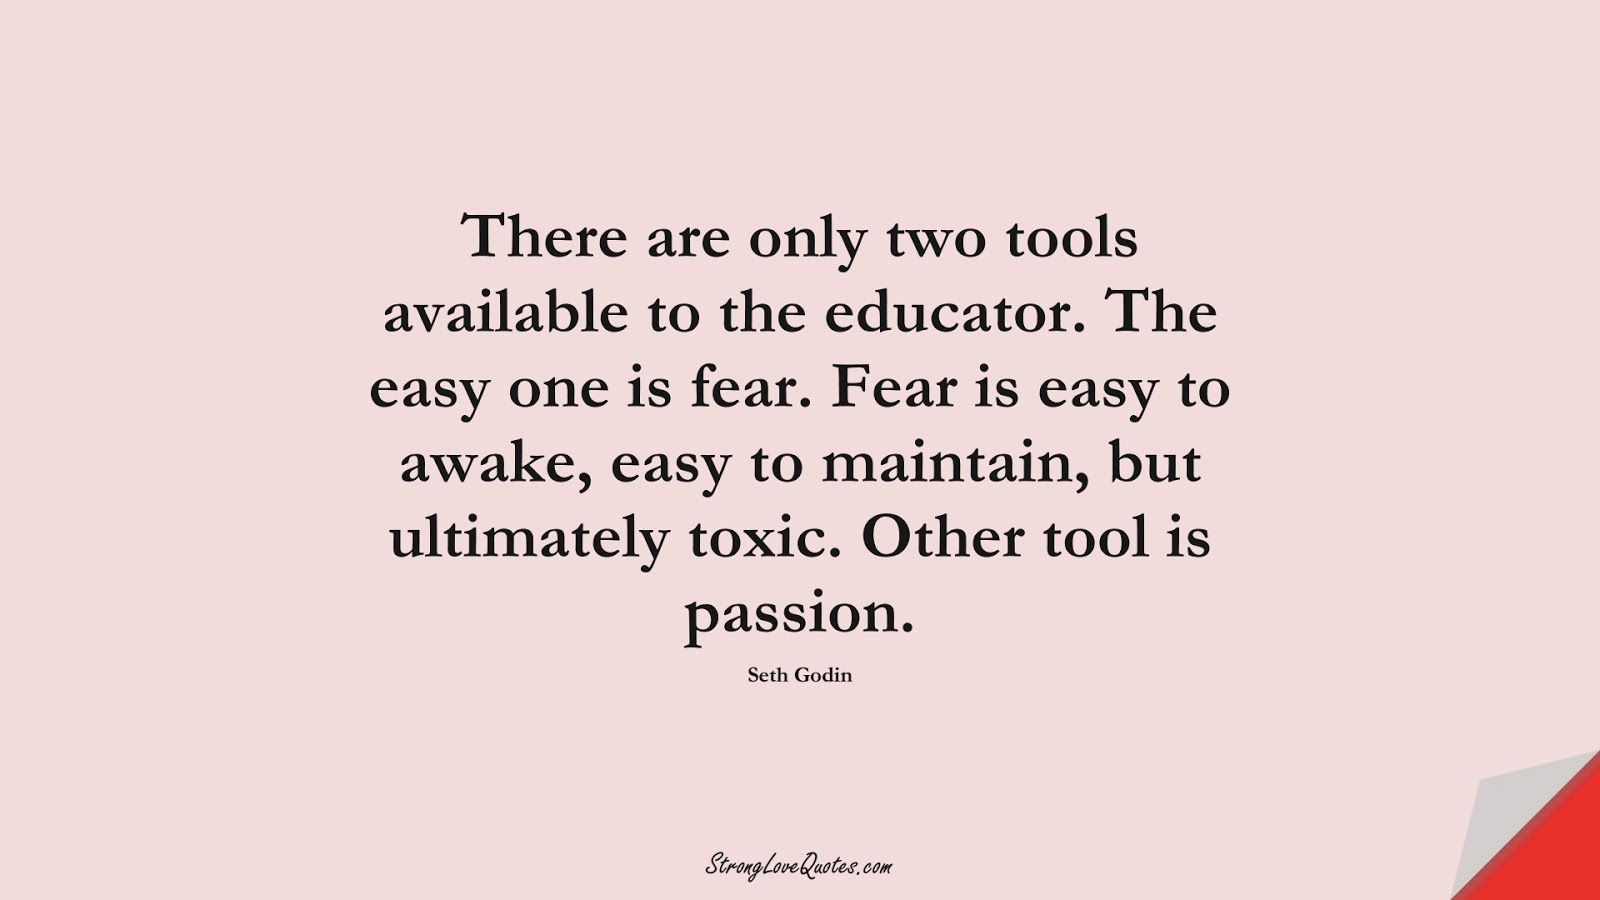 There are only two tools available to the educator. The easy one is fear. Fear is easy to awake, easy to maintain, but ultimately toxic. Other tool is passion. (Seth Godin);  #LearningQuotes